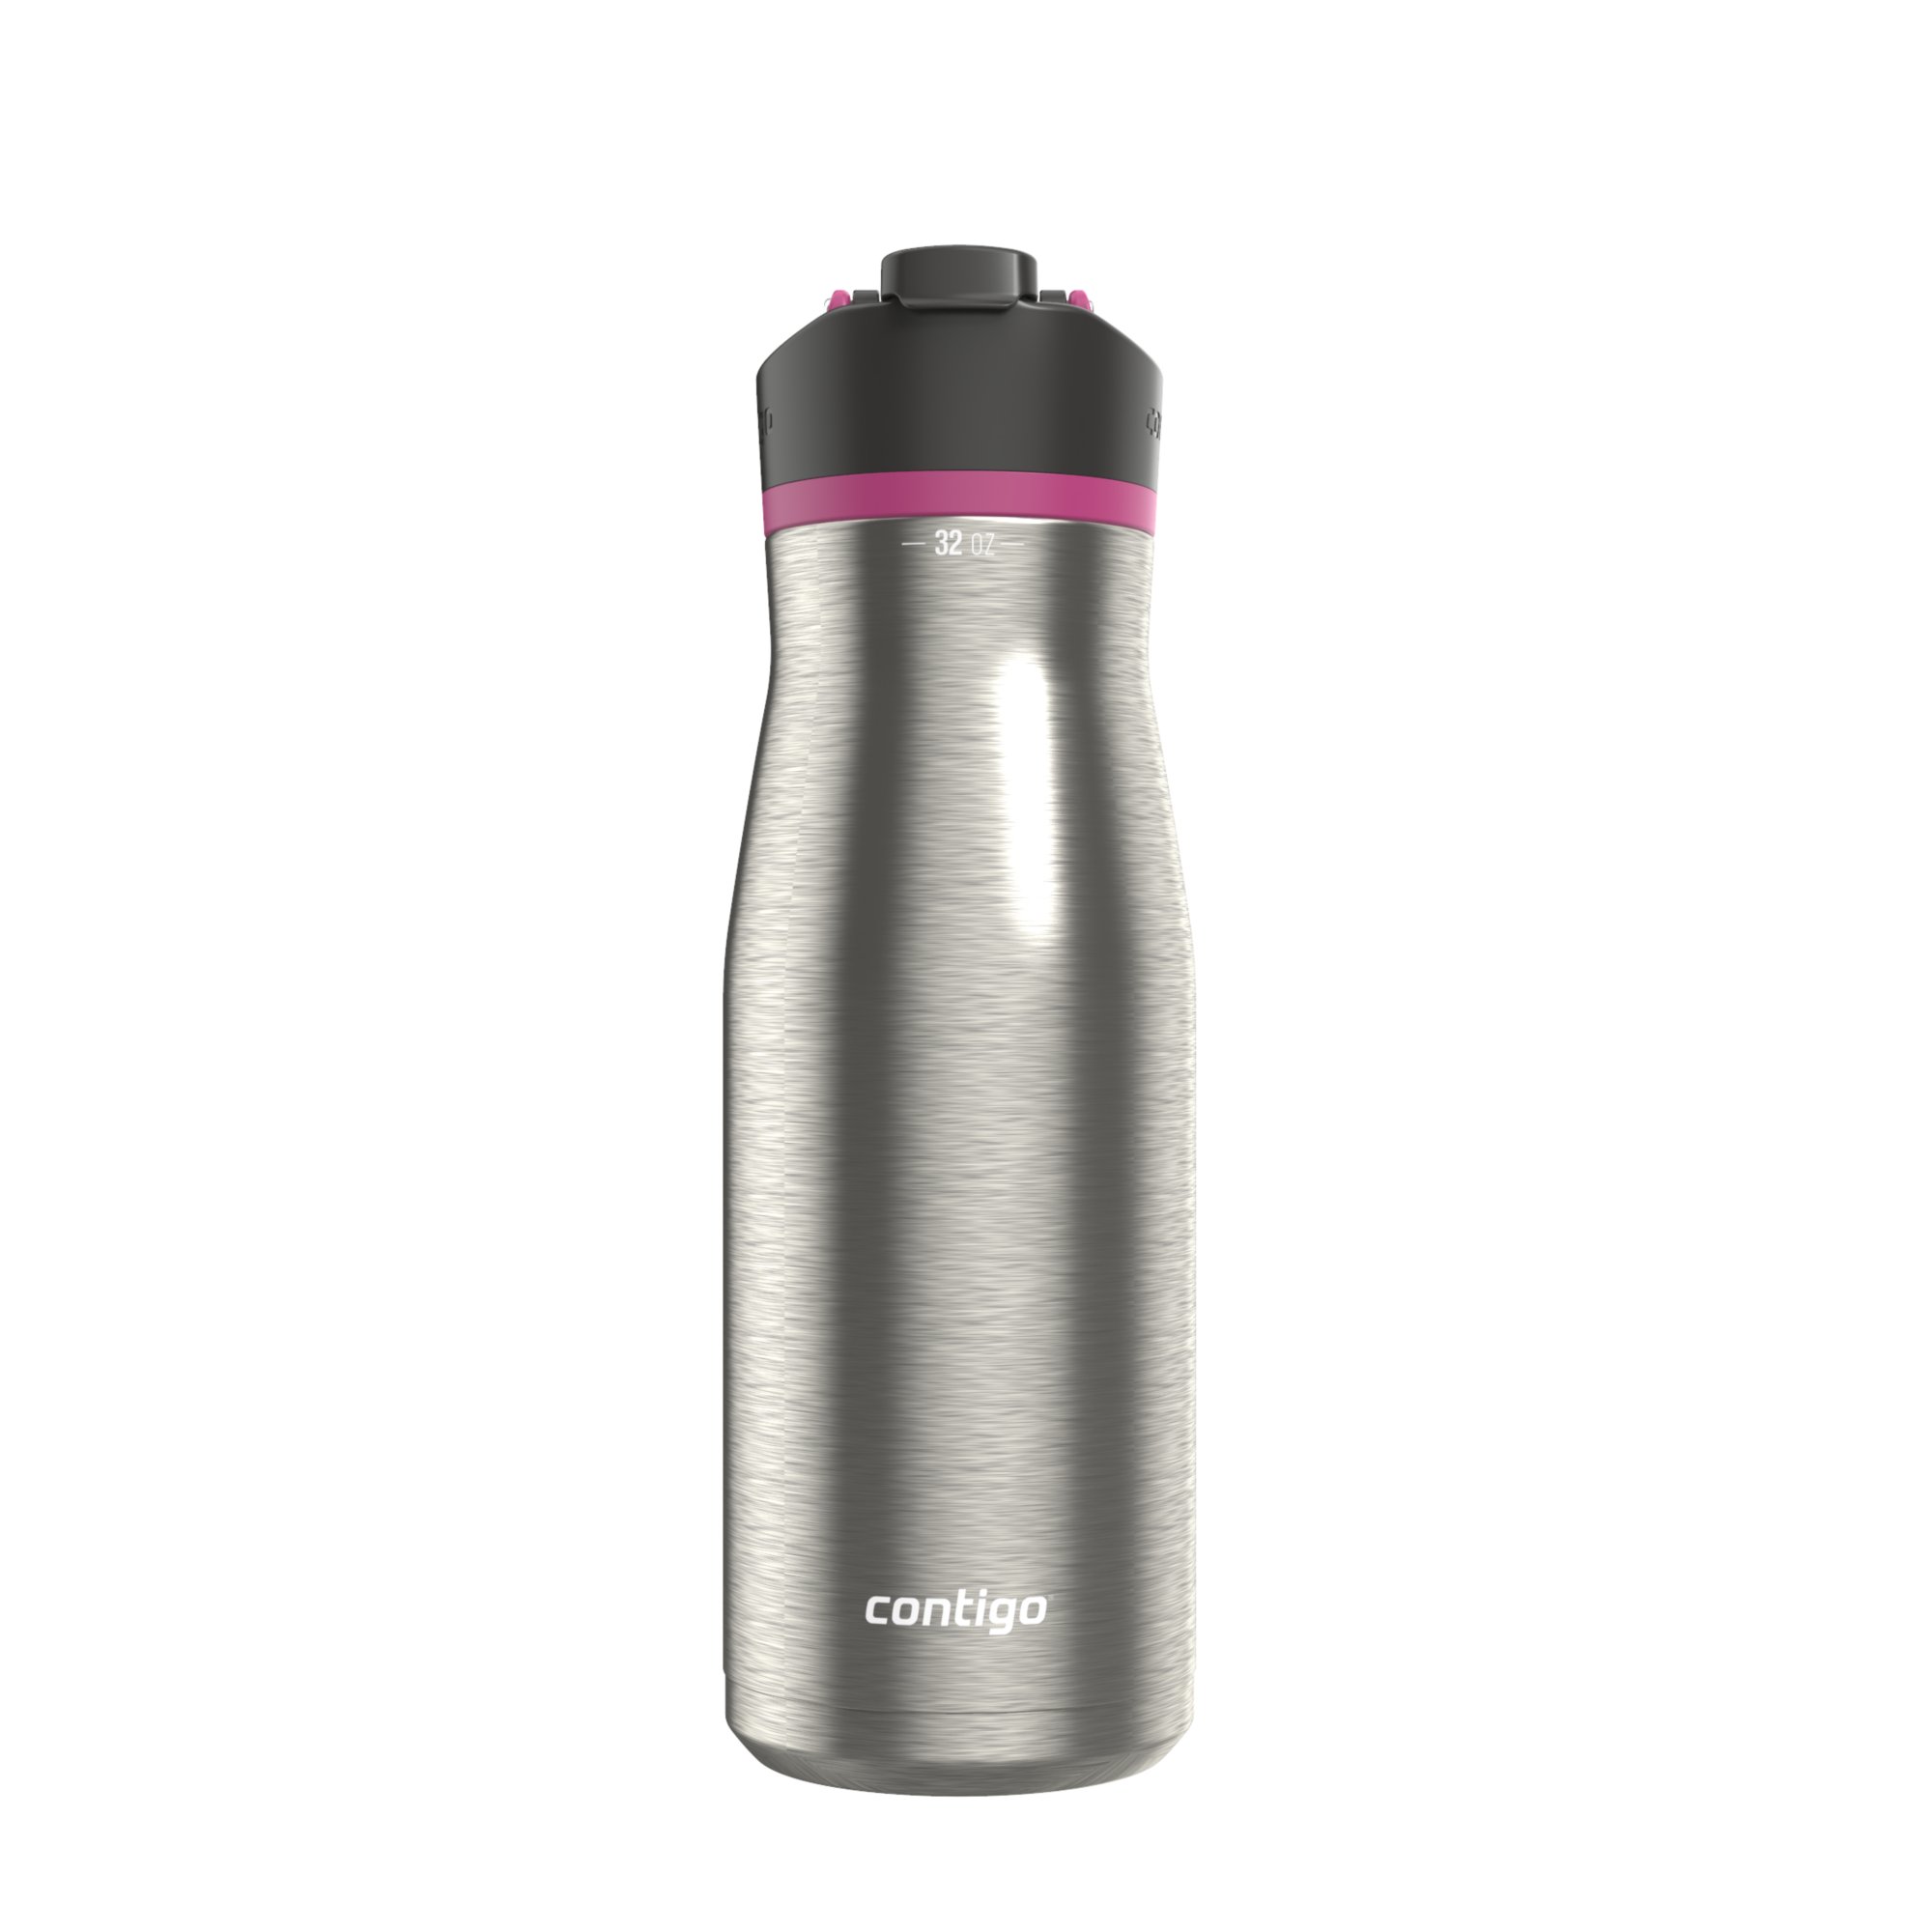 Contigo Autoseal Chill Vacuum-Insulated Stainless Steel Water